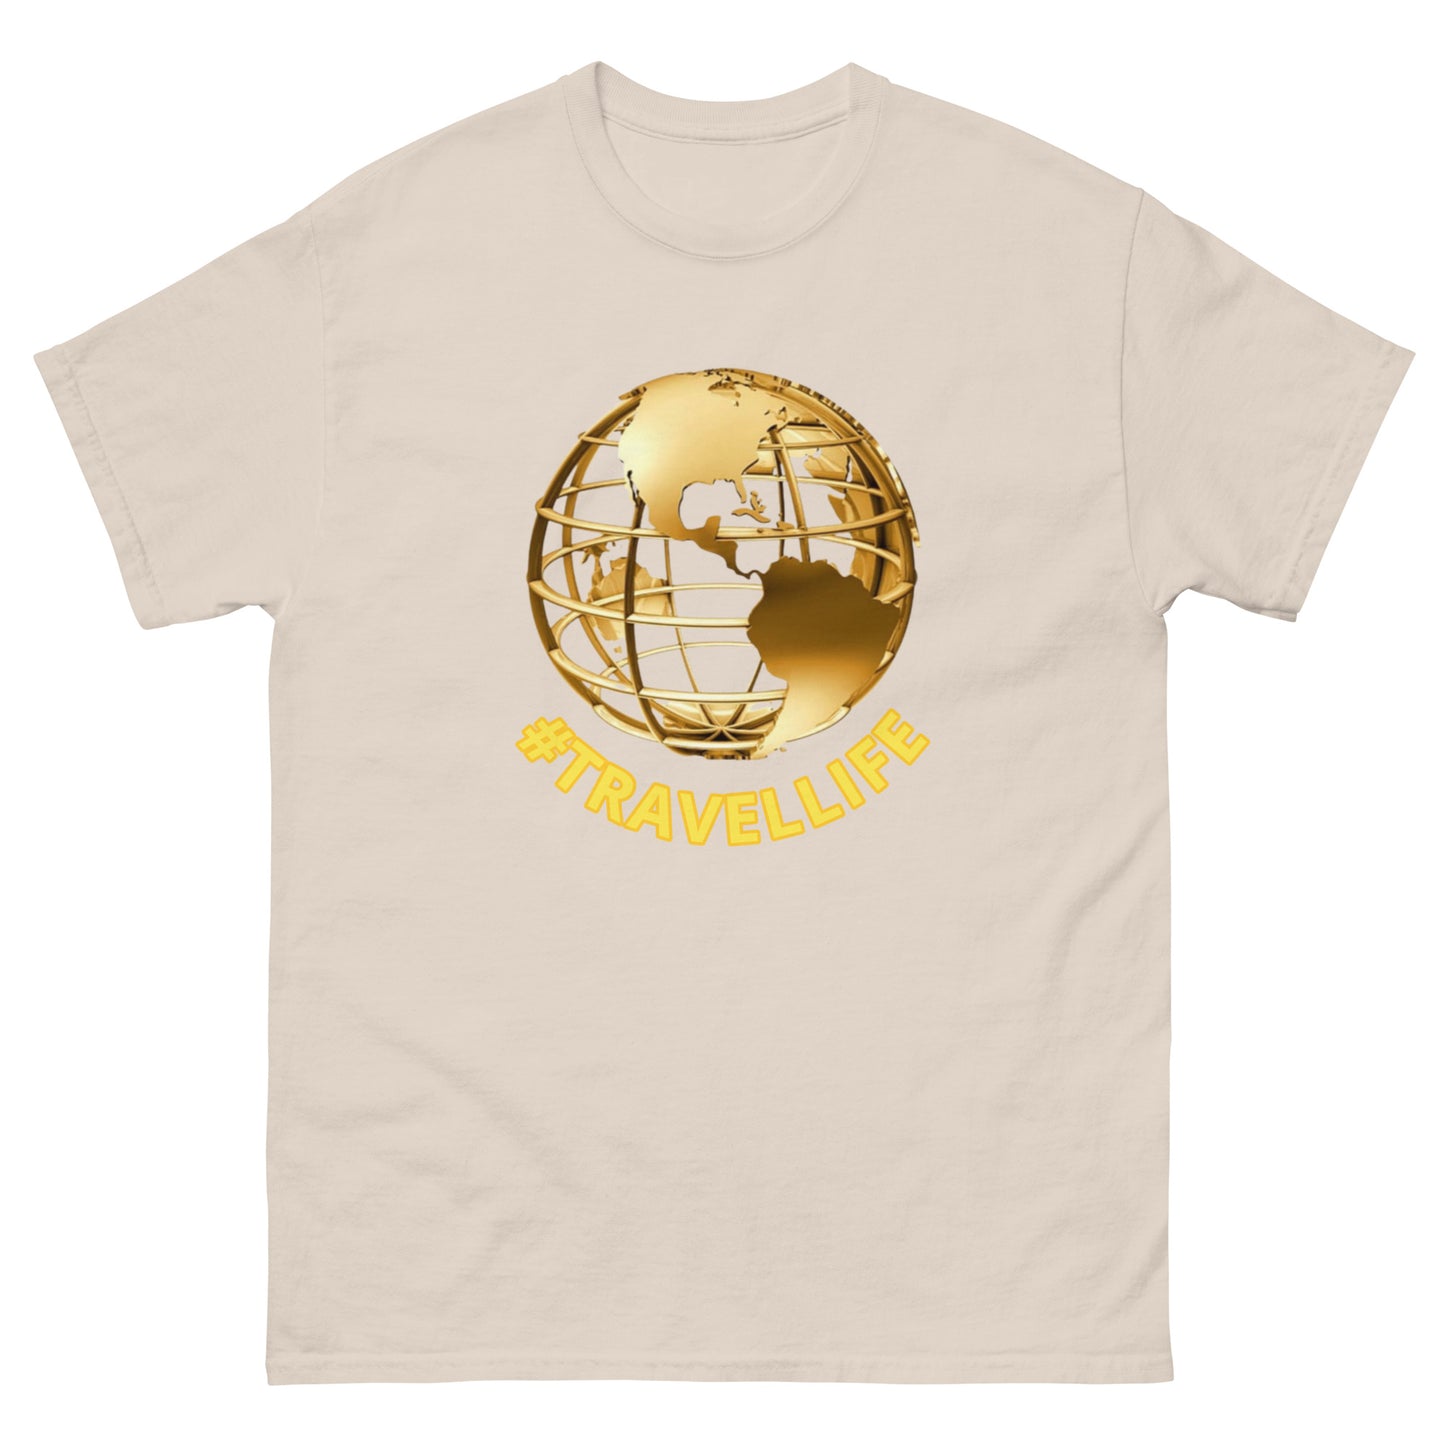 #Travellife World Men's Classic Tee Gold Text